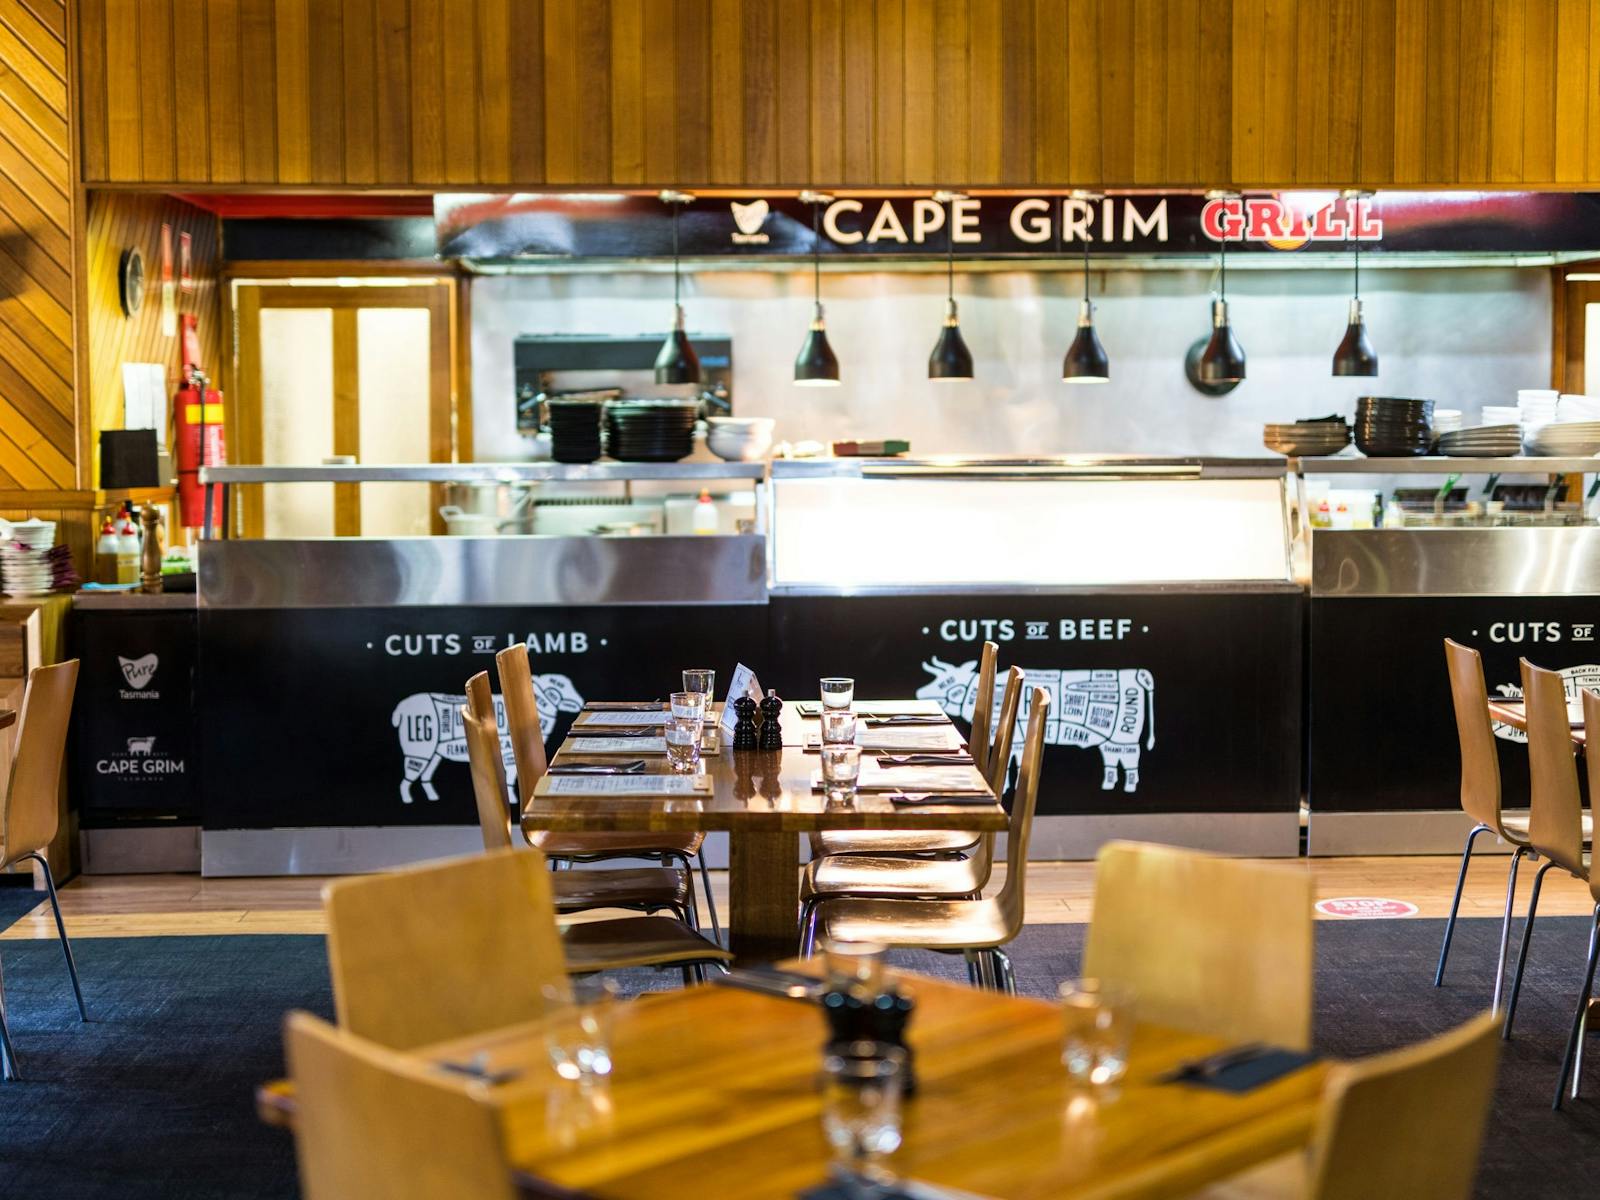 Open part of kitchen with 'Cape Grim Grill' signage above & Kauri Bistro tables in foreground